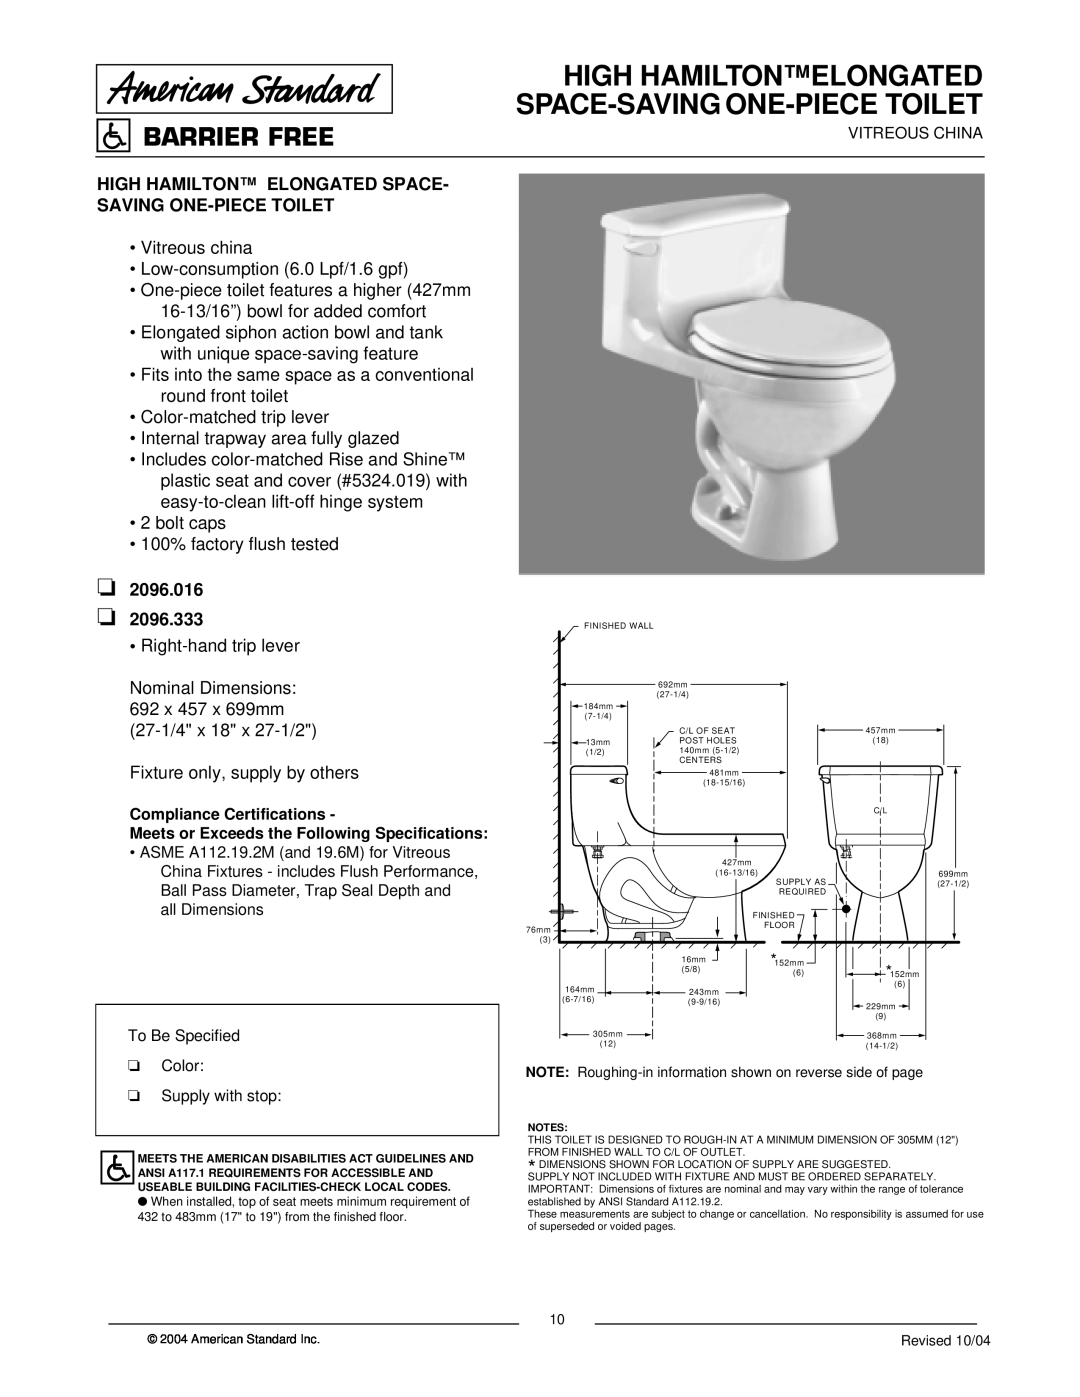 American Standard 2096.333 dimensions High Hamiltonelongated, Space-Saving One-Piecetoilet, Barrier Free, 2096.016 